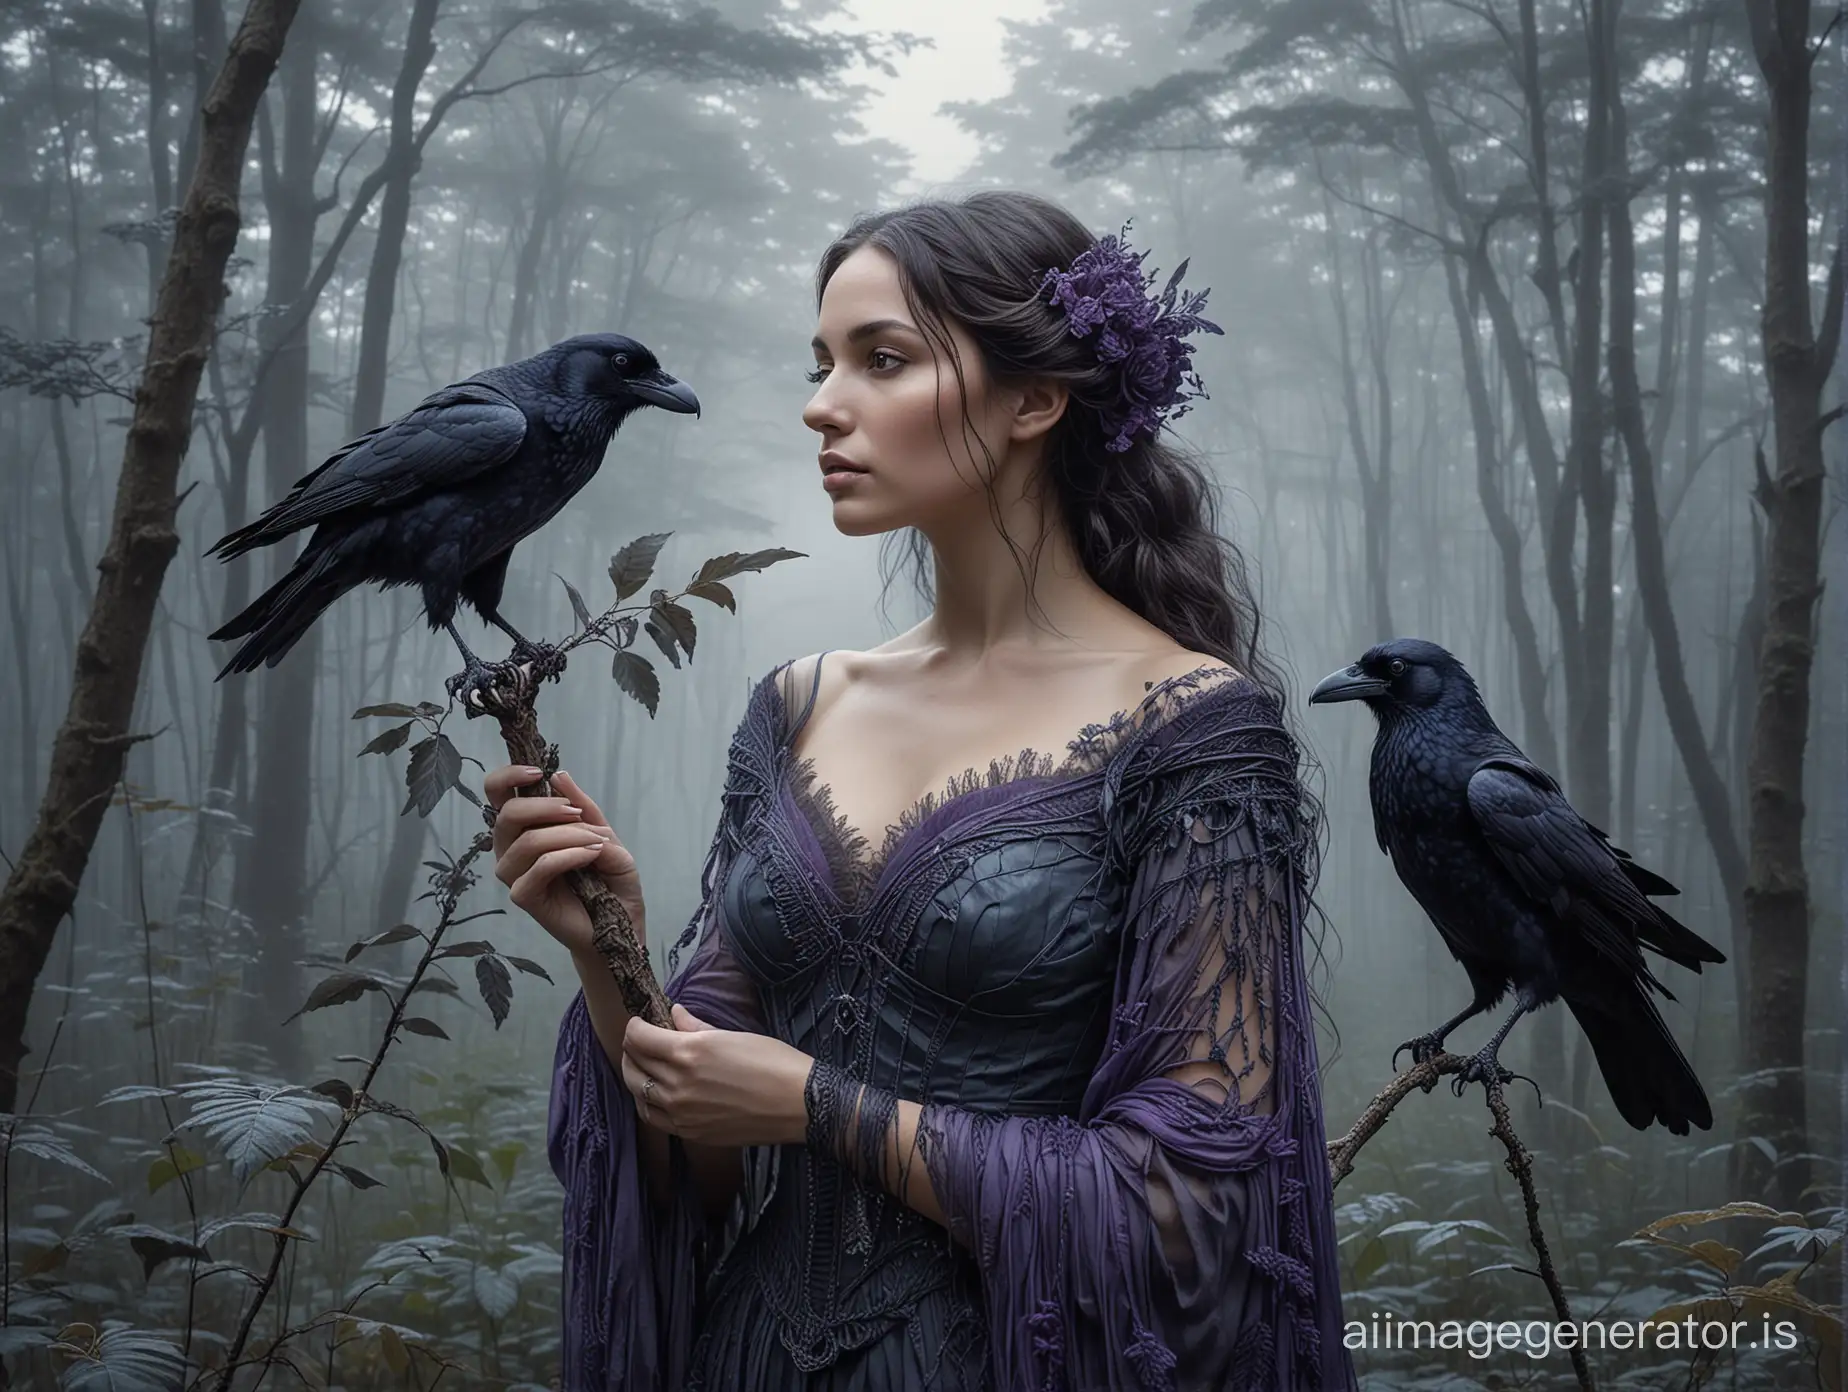 Fibonacci-Sequence-Beauty-Woman-with-Raven-Pet-in-Dark-Forest